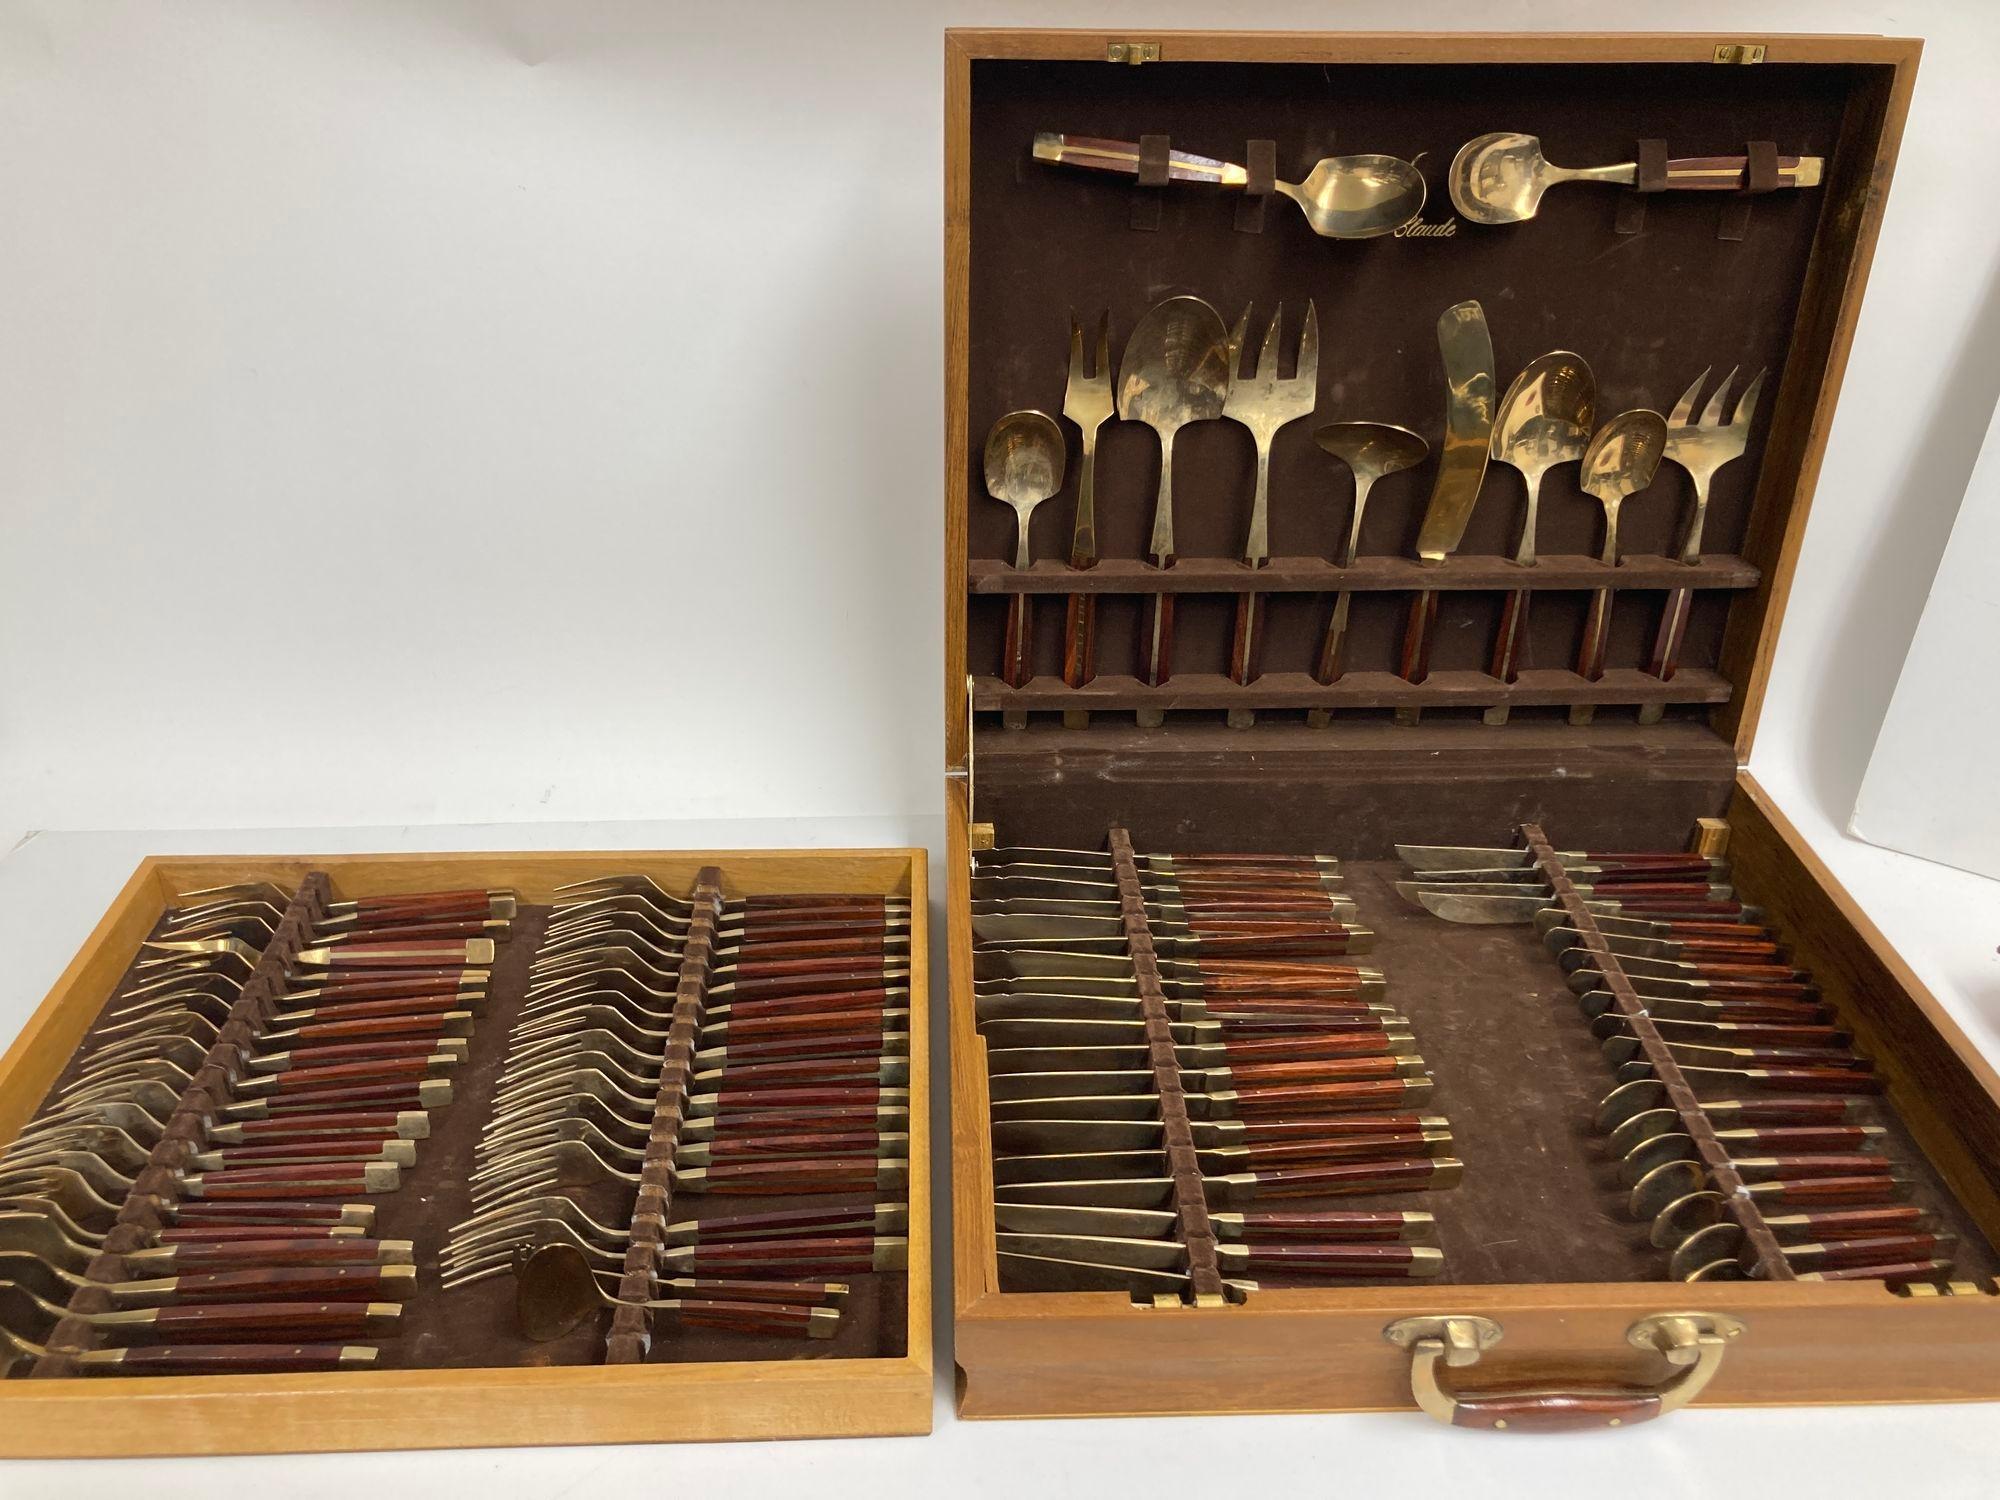 Vintage 1960s Rosewood and Bronze Flatware Set by Jean Claude 89 pieces.
Fabulous vintage rosewood and bronze 89 pieces service for eight with serving pieces.
It is vintage from the 1960's.
This is a beautiful 89 pieces set in the original wooden